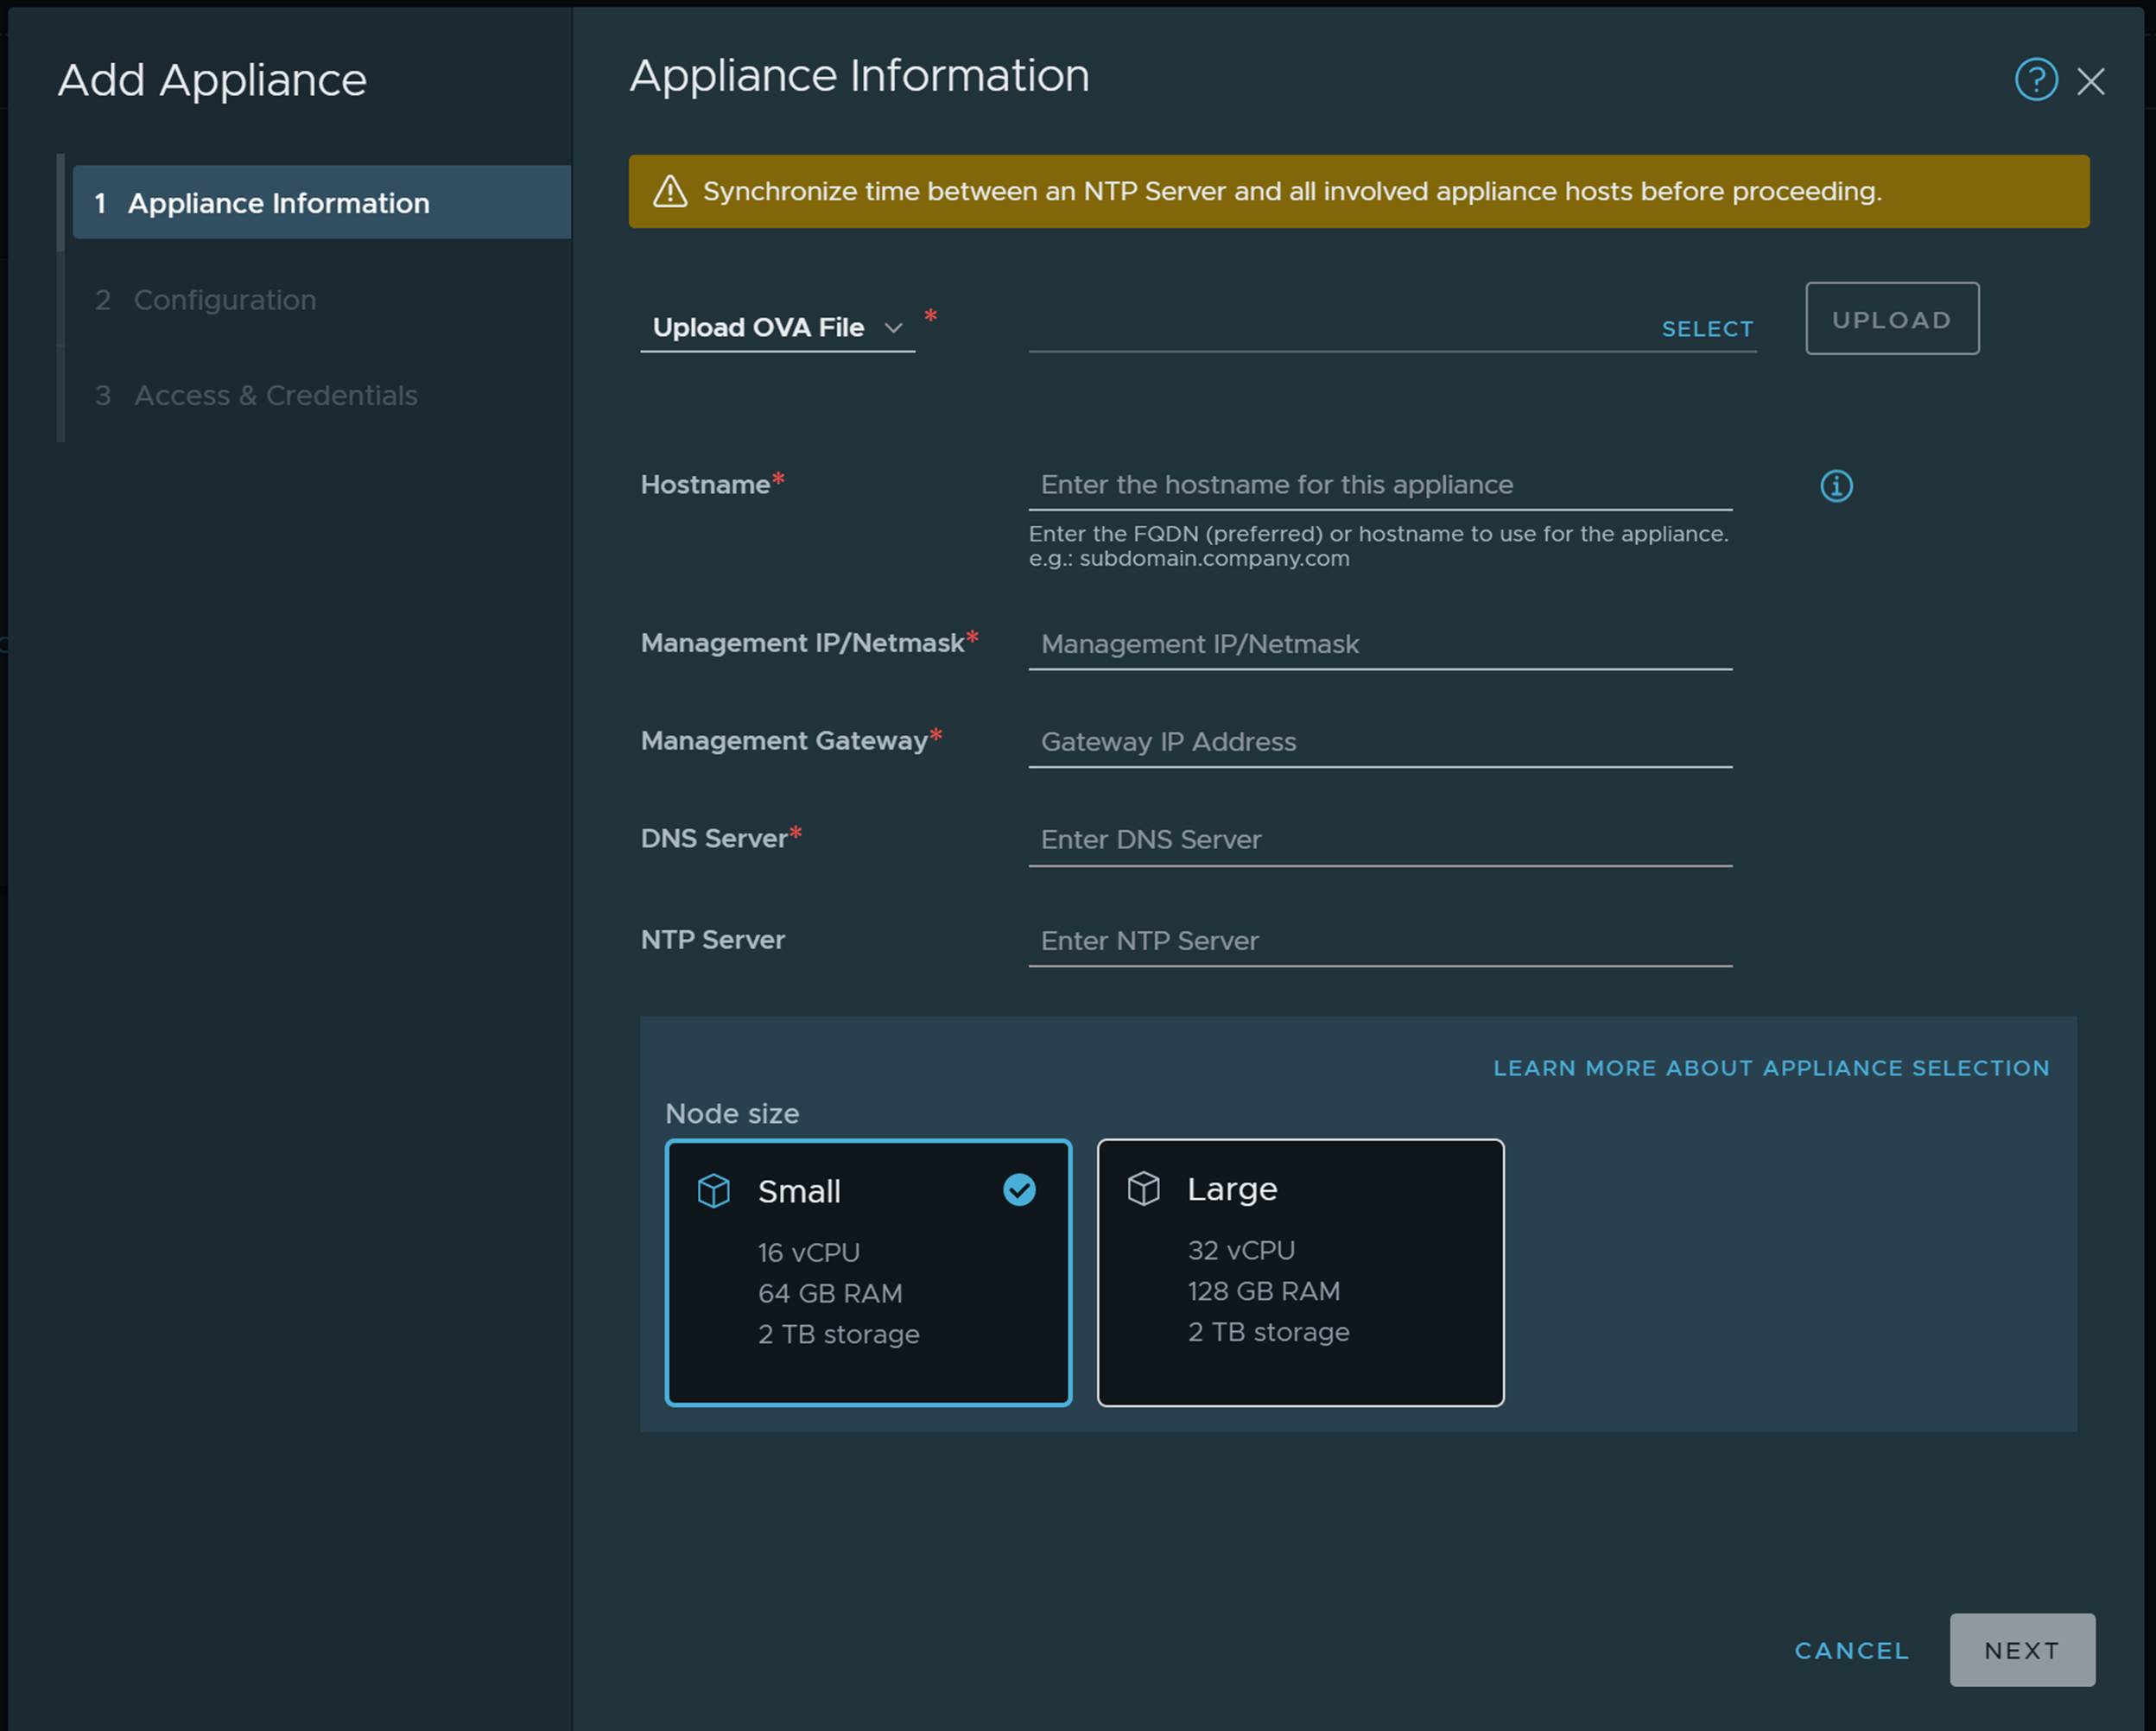 NSX Intelligence Add Appliance wizard. The fields are described in the steps and content surrounding the image.